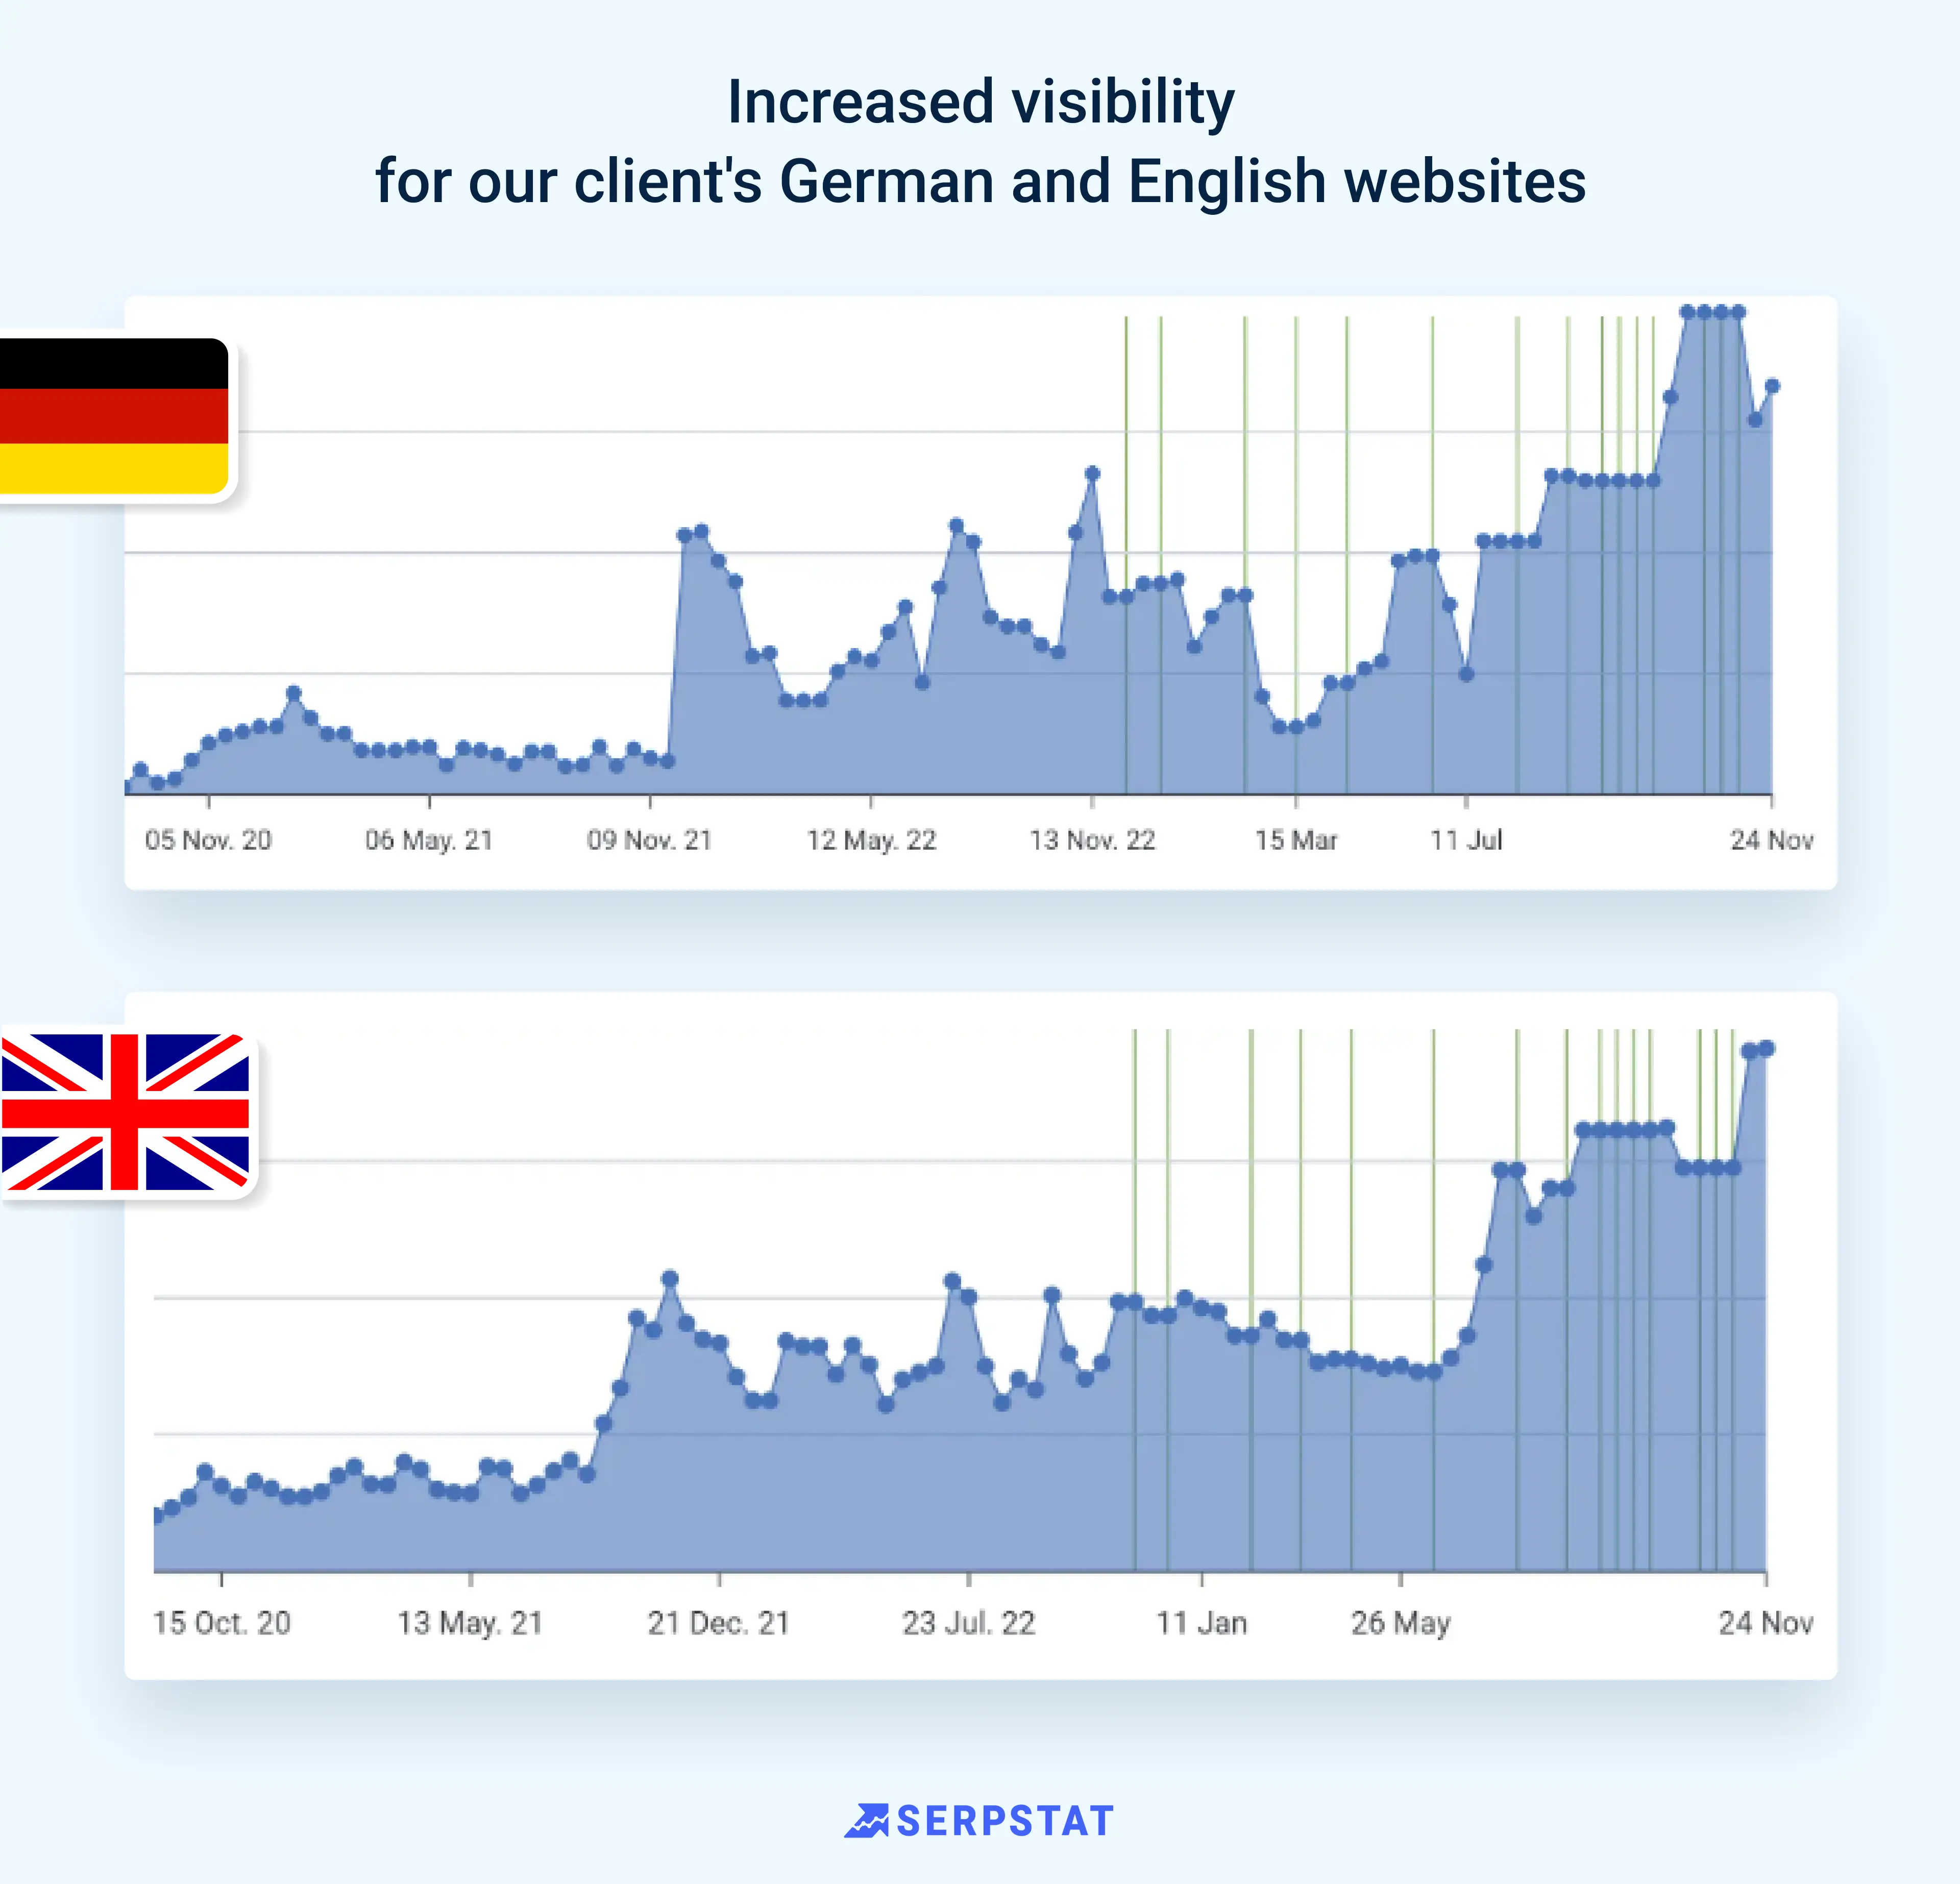 Increased visibility for our client's German and English websites